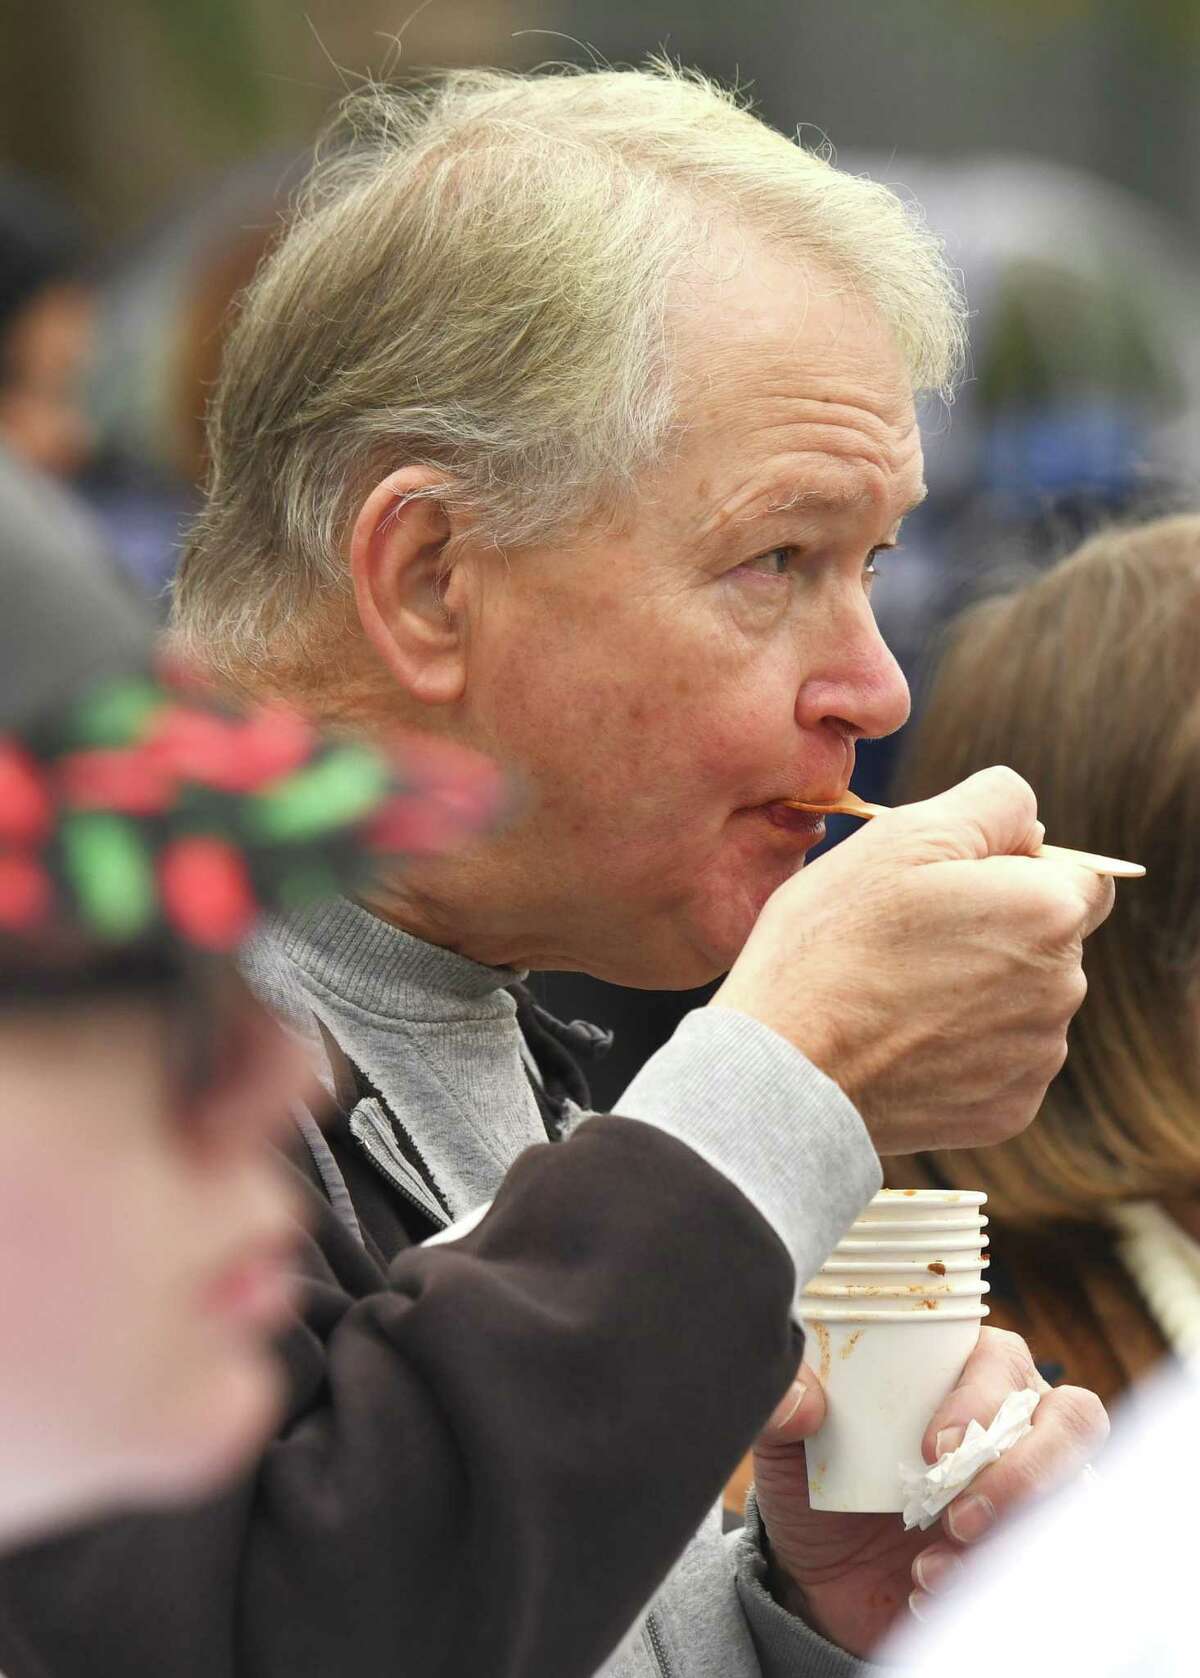 Stamford's Ken McCue racks up a number of sample cups as her tries another chili at the 12th Annual Charity Chili Cookoff at J. M. Wright Technical High School in Stamford, Conn. Sunday, Oct. 20, 2019. The event featured more than a dozen local contestants offering many unique and flavorful varieties of chili to benefit the Food Bank of Lower Fairfield County.